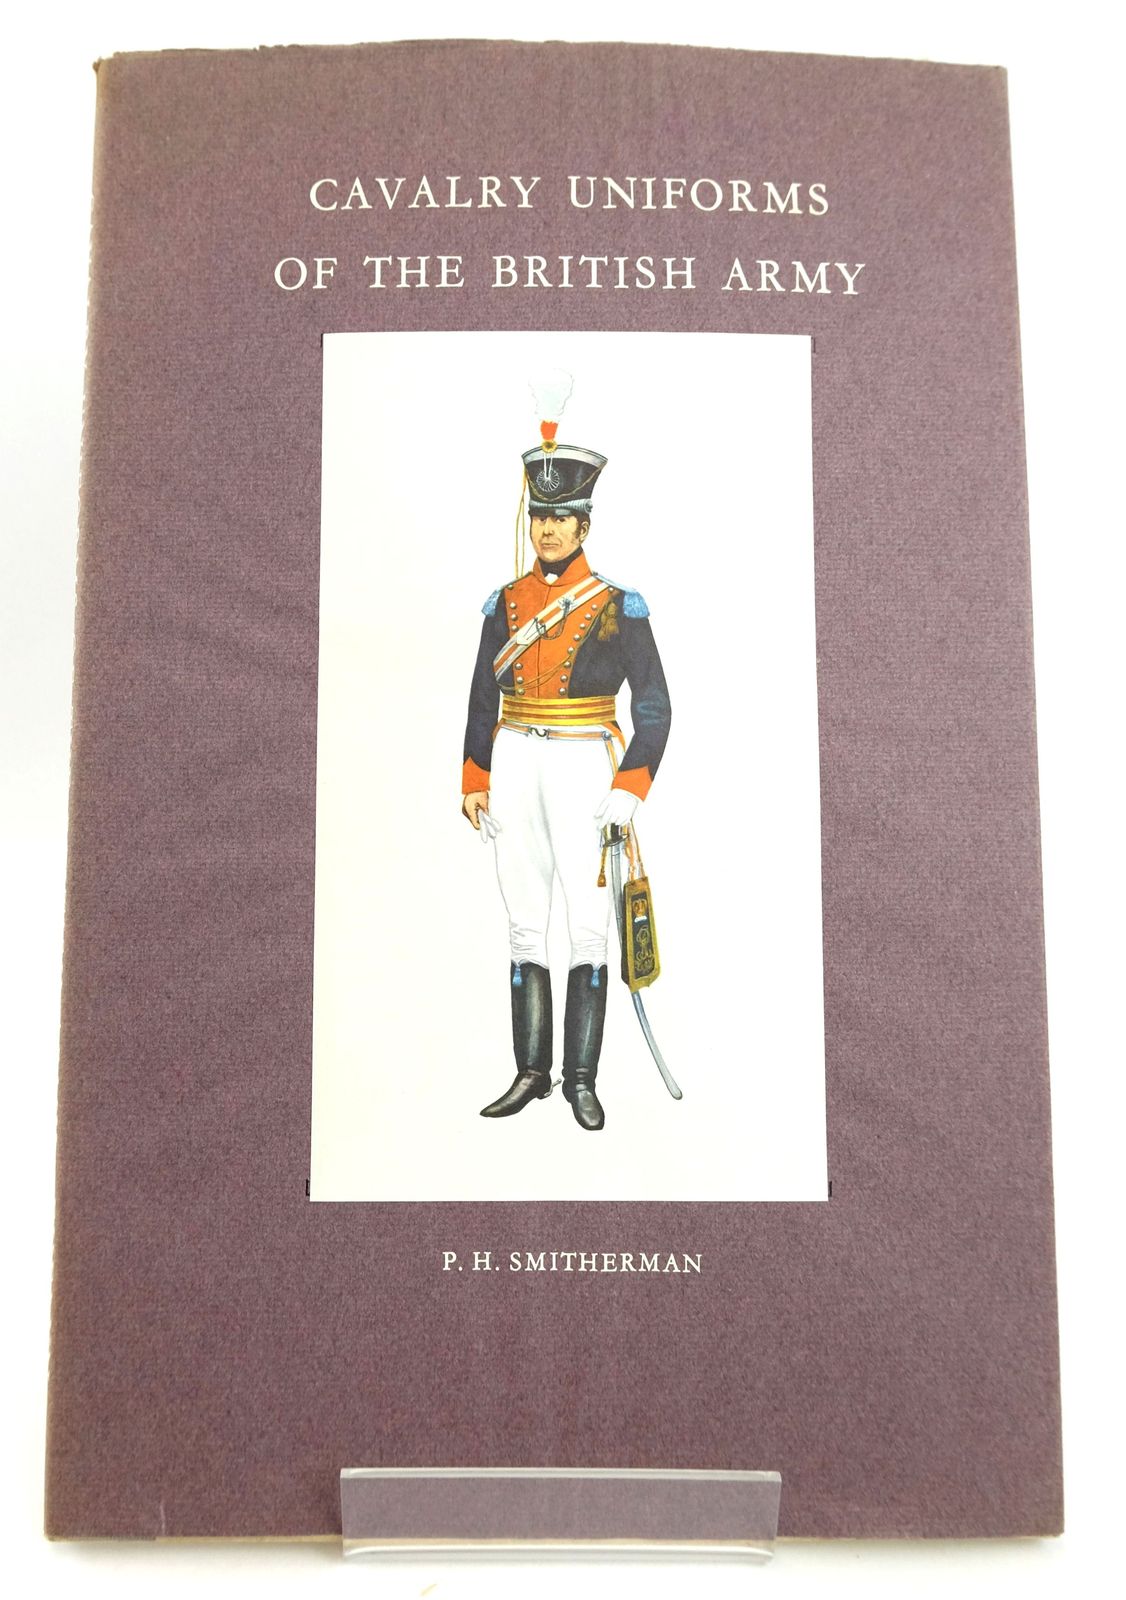 Photo of CAVALRY UNIFORMS OF THE BRITISH ARMY written by Smitherman, P.H. illustrated by Smitherman, P.H. published by Hugh Evelyn (STOCK CODE: 1819981)  for sale by Stella & Rose's Books